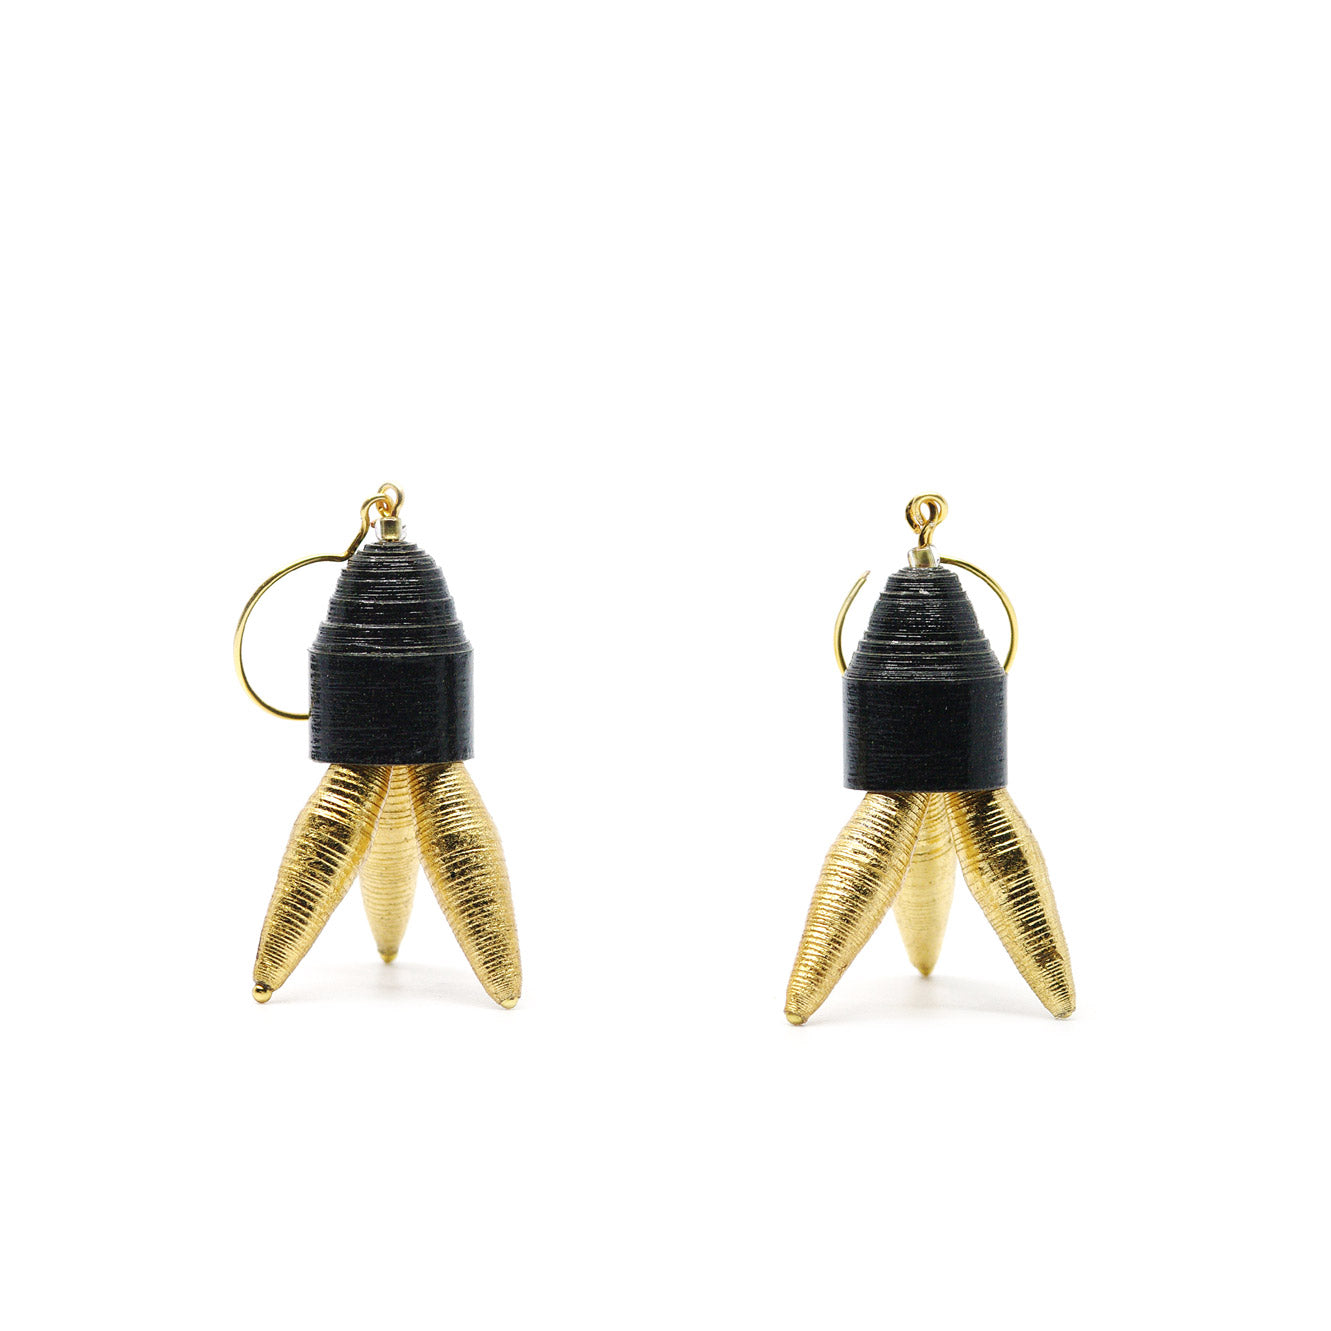 Black and Golden Tripod Paper Earrings Back to Black Collection Chiramo Paper Jewelry